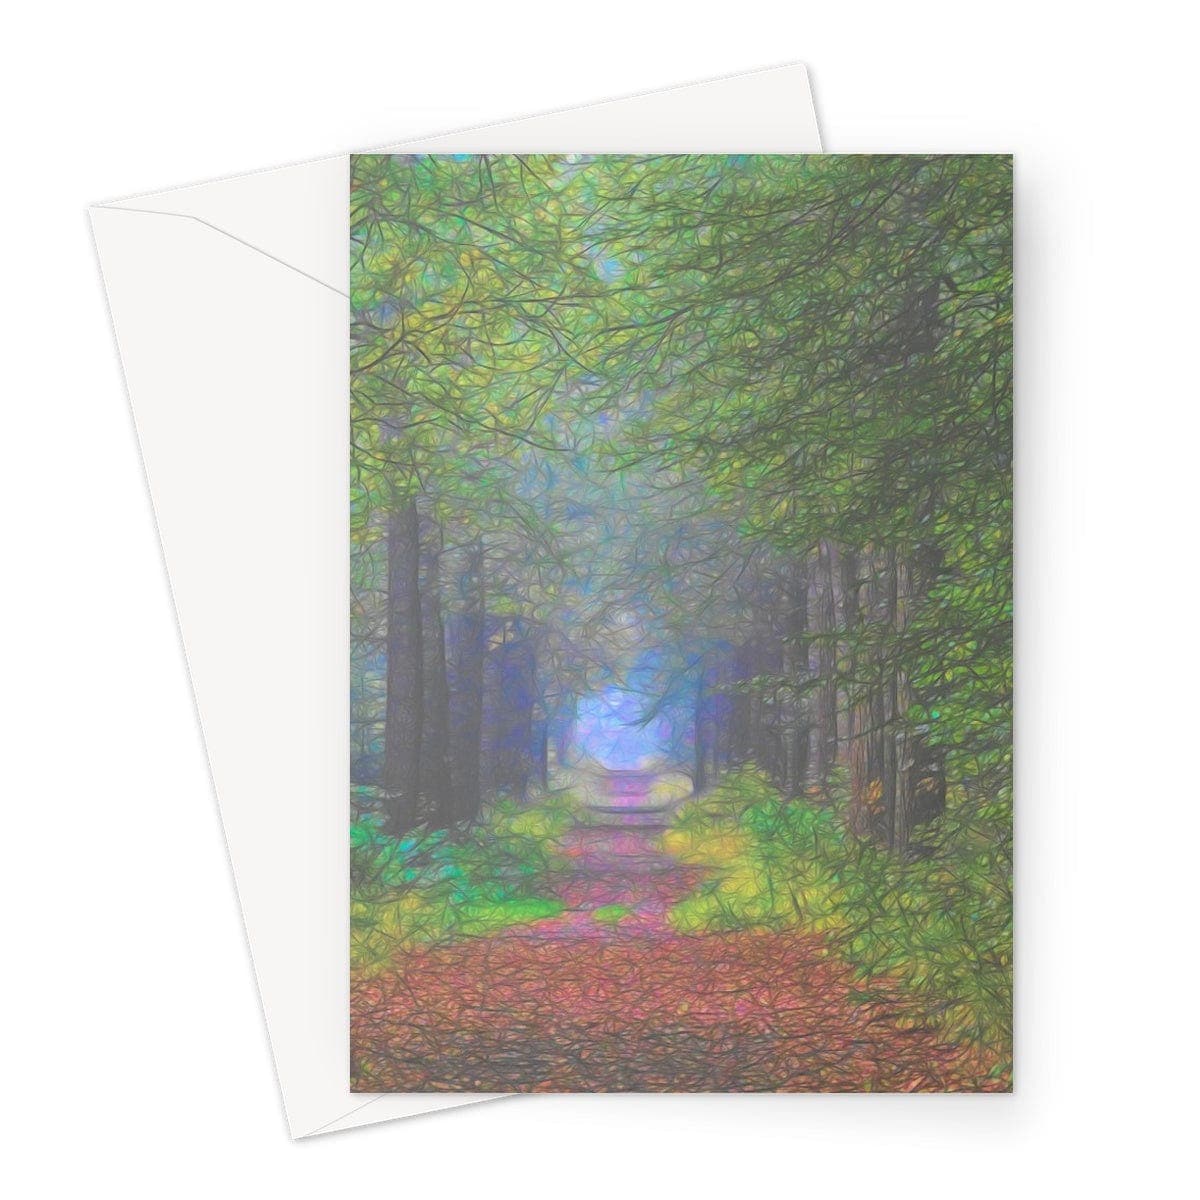 Forest lane, Art on a Greeting Card, by Sensus Studio